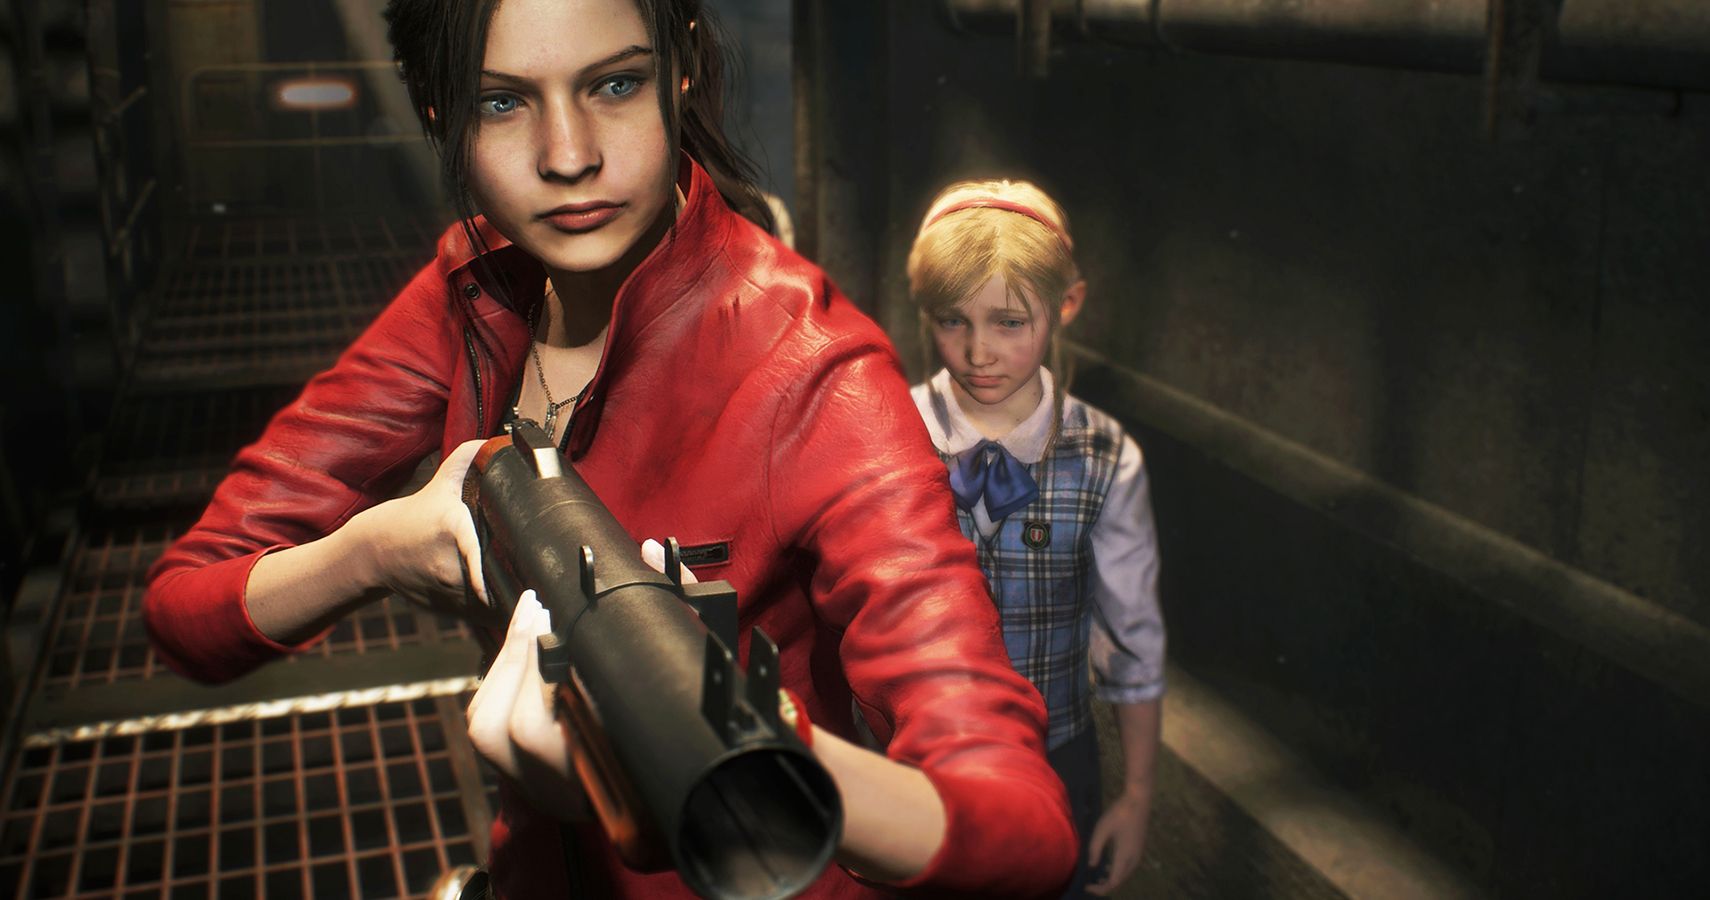 Alyson Court Confirms: Not Reprising Claire for Resident Evil 2 Remake -  Rely on Horror